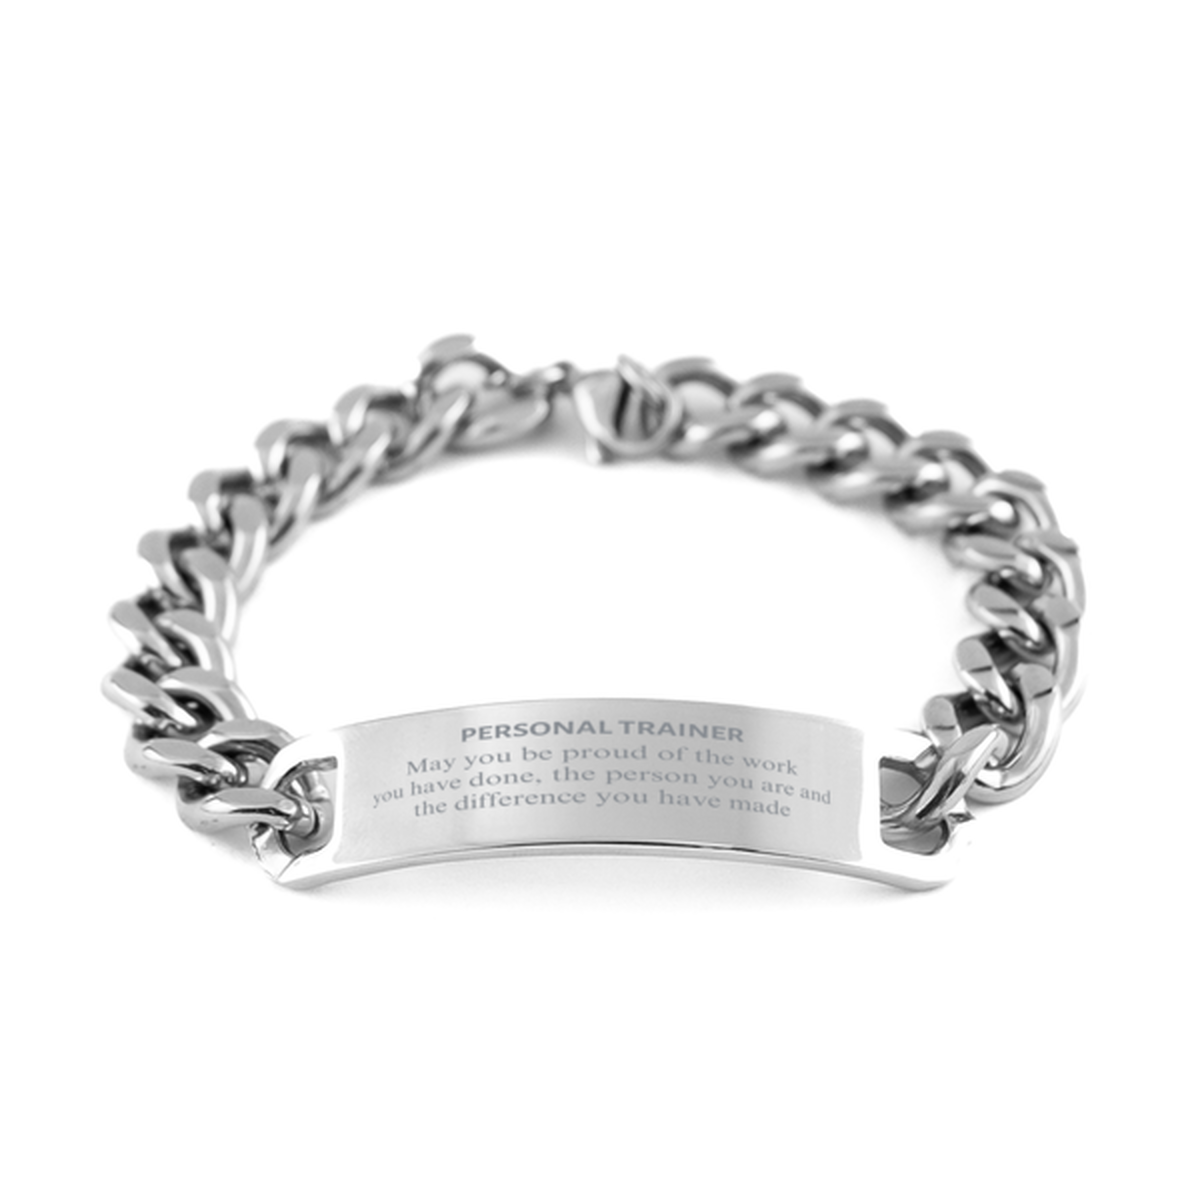 Personal Trainer May you be proud of the work you have done, Retirement Personal Trainer Cuban Chain Stainless Steel Bracelet for Colleague Appreciation Gifts Amazing for Personal Trainer